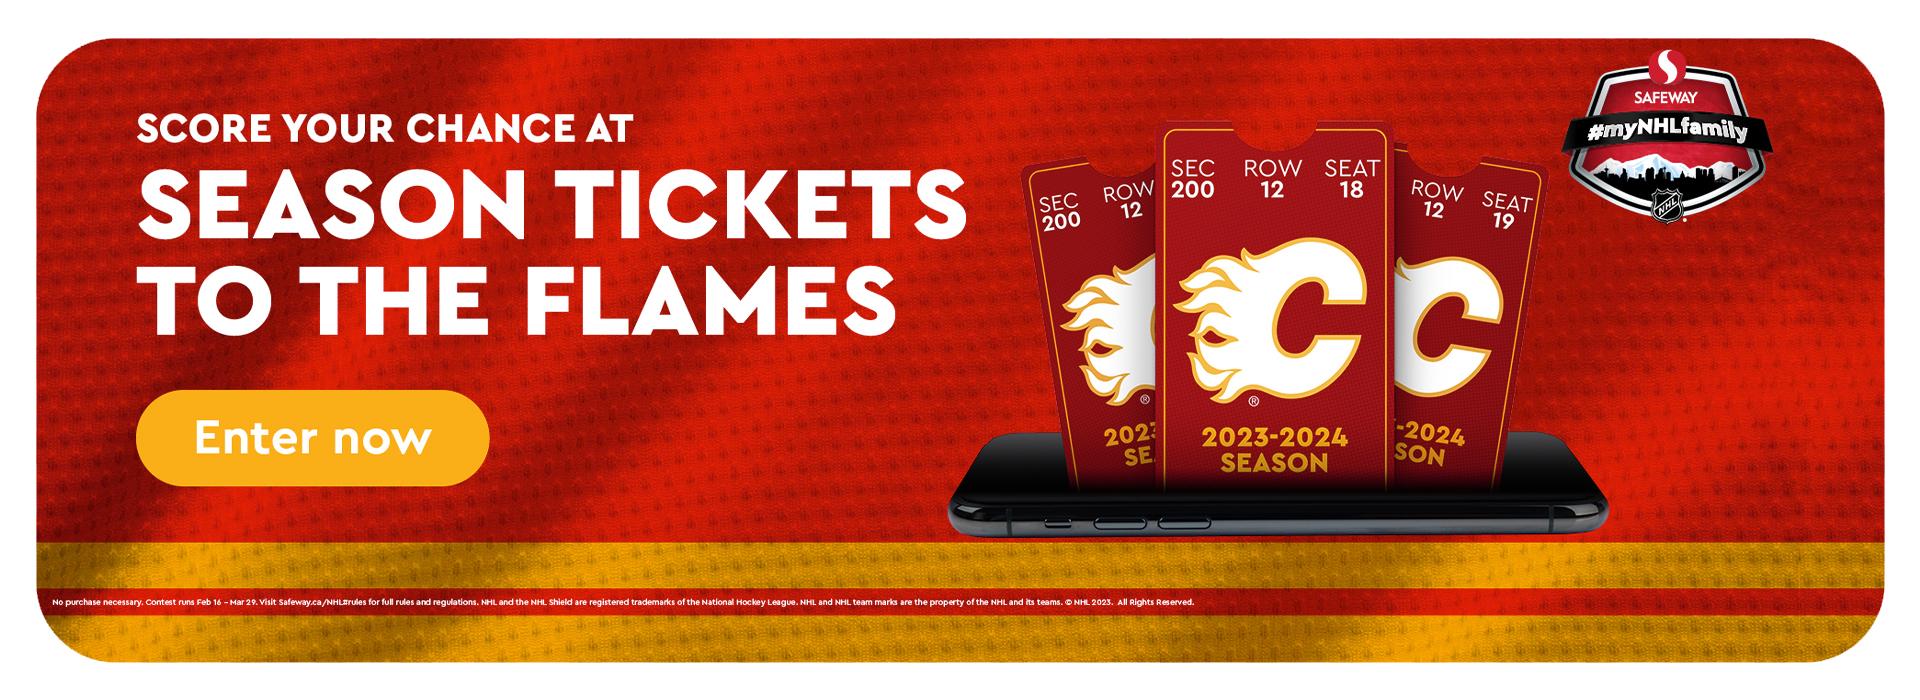 Score your chance at seasons tickets to the Flames